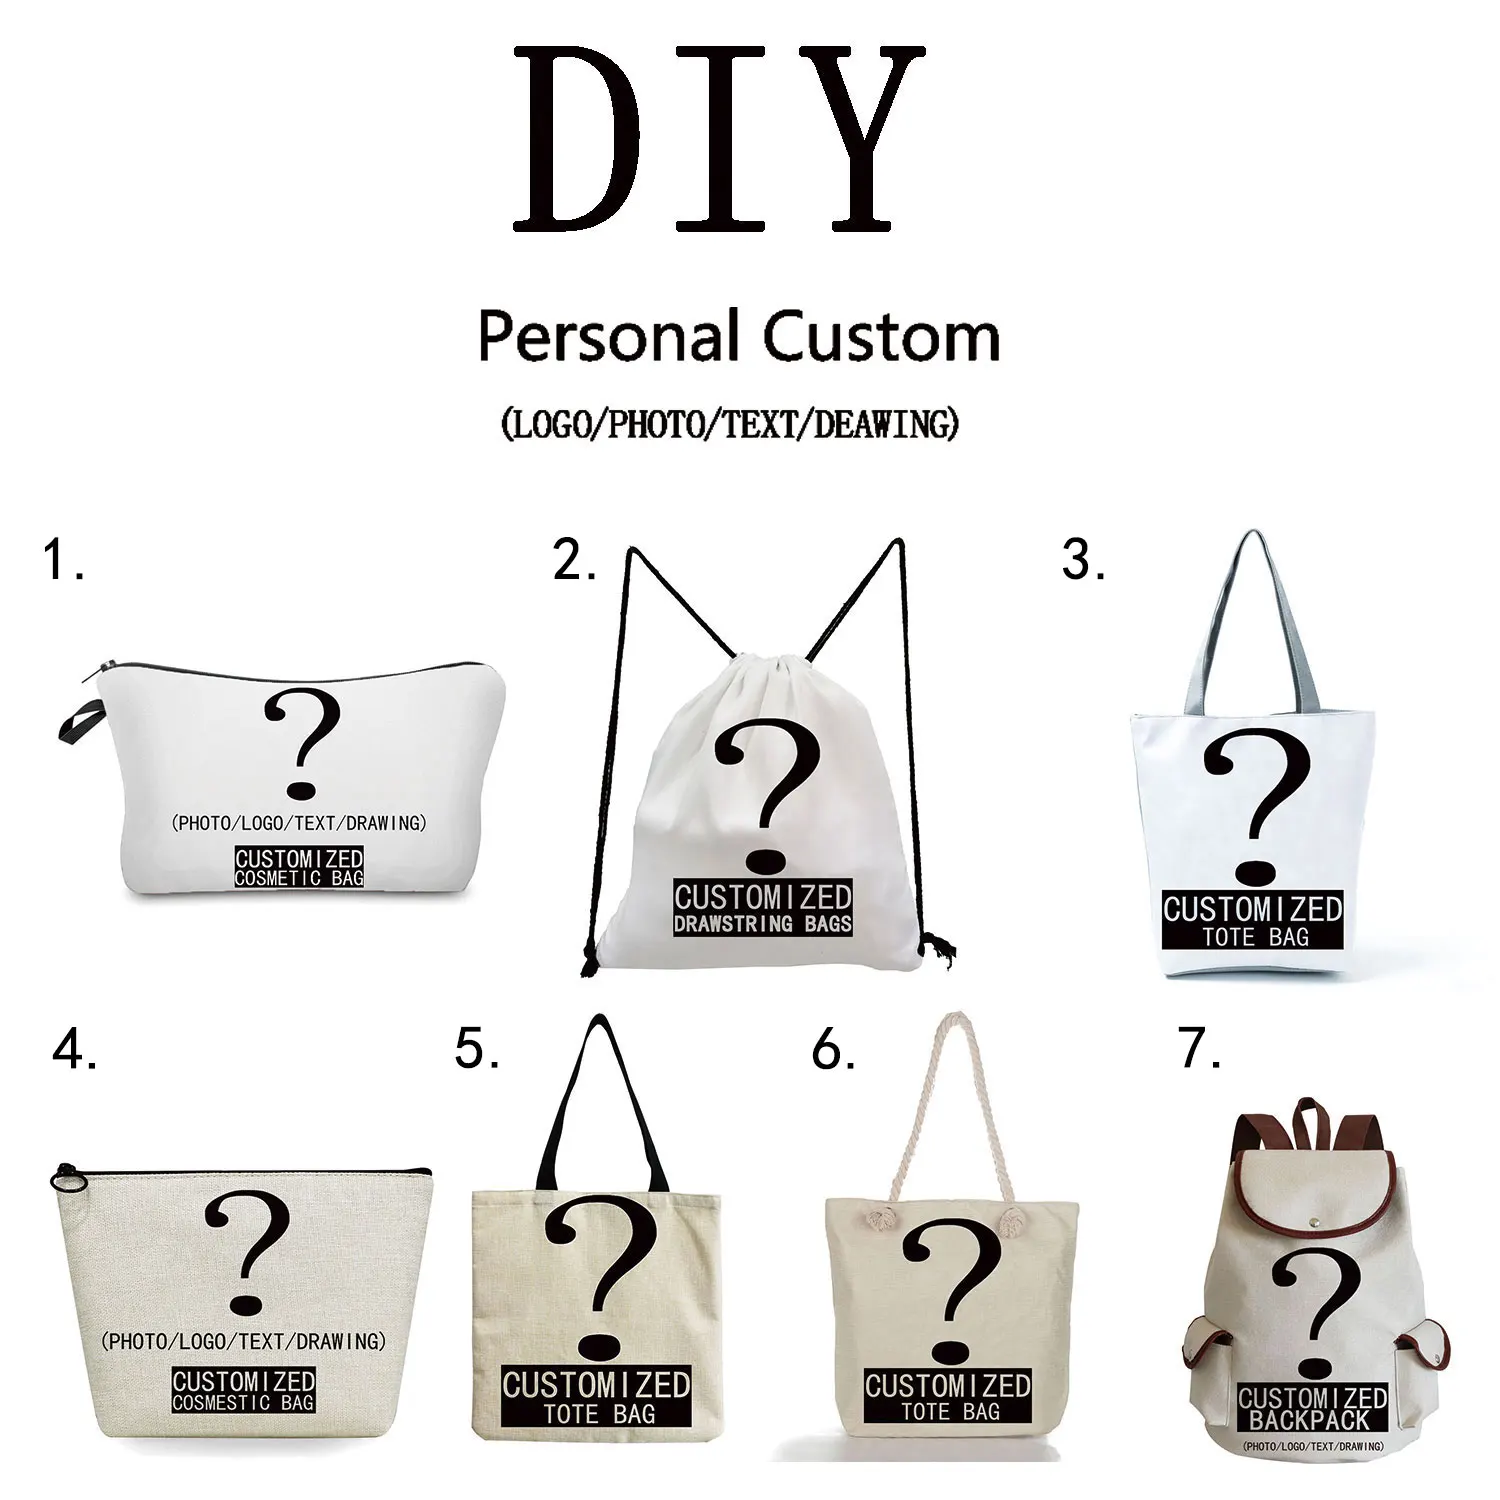 Personal Custom DIY Logo Makeup Bags Pouch Women Cosmetic Bag Toiletries Organizer Wedding Birthday Party Gift Photo Text Pouch